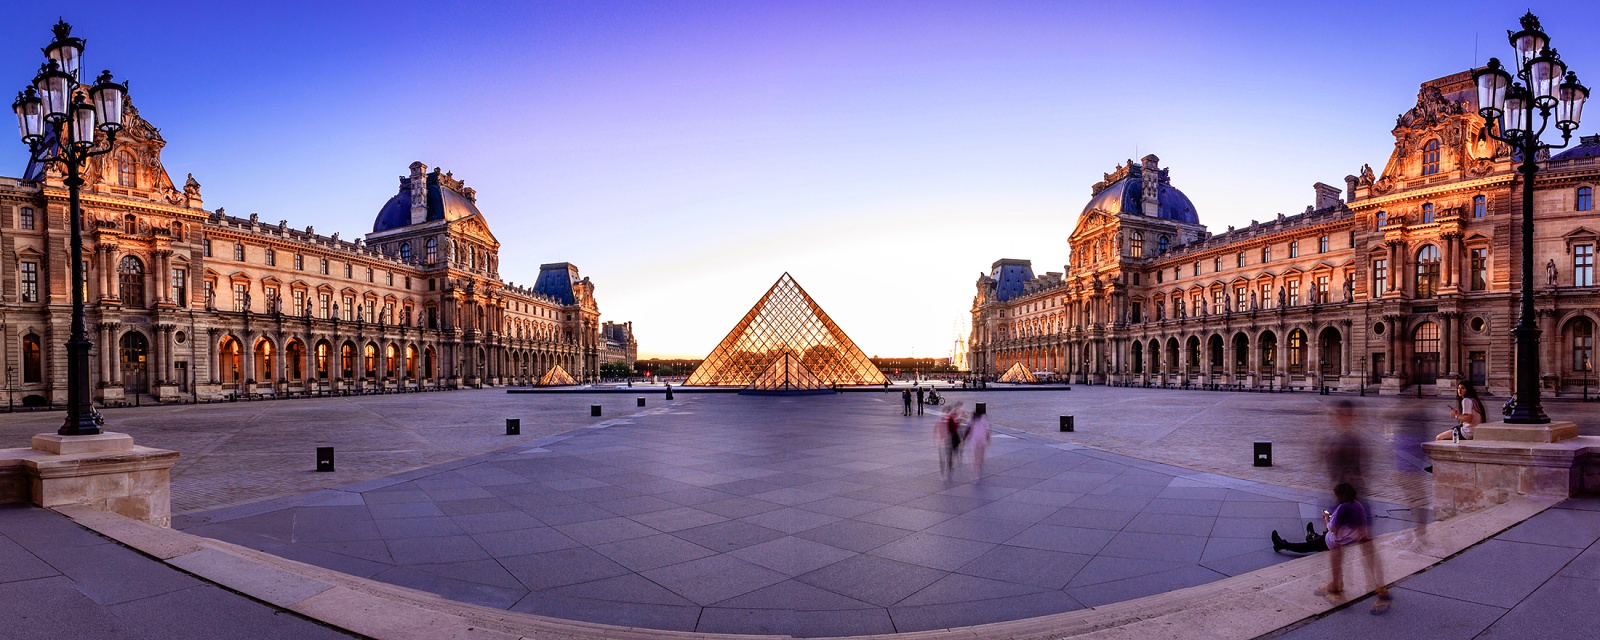 HERO_Louvre-museum-at-sunset-panorama-view-is-the-worlds-largest-art-museum-and-a-historic-monument-in-Paris-France_thetimes.co.uk.jpg